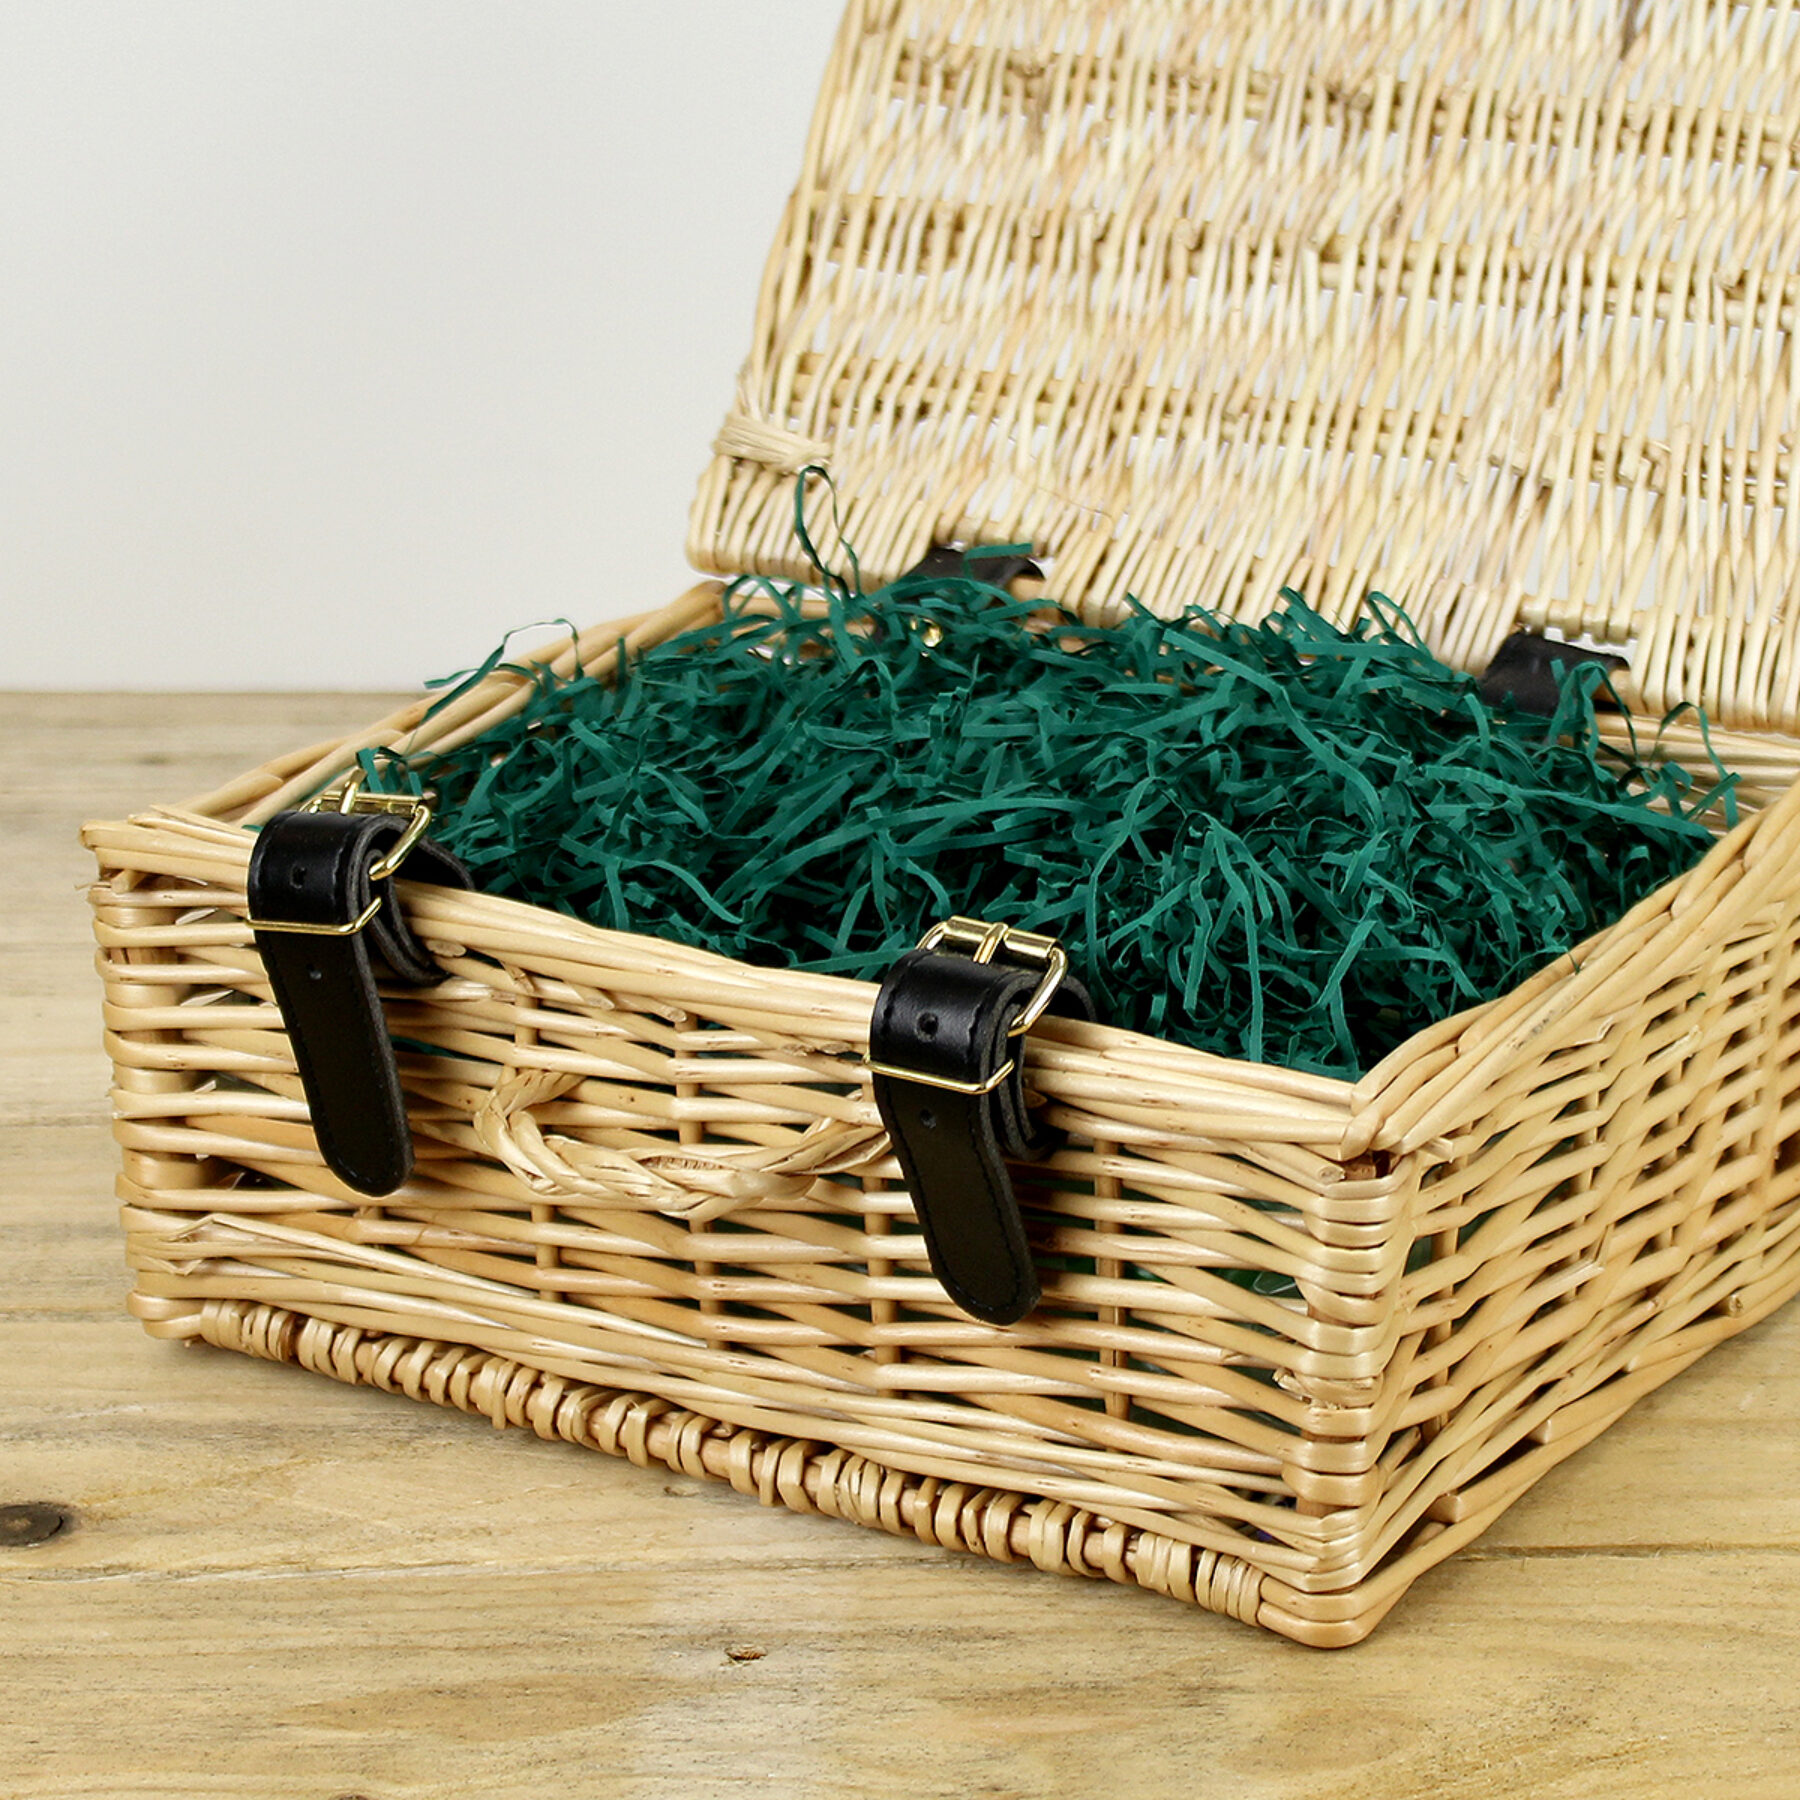 Natural Wicker Hamper Basket - Open with green shred